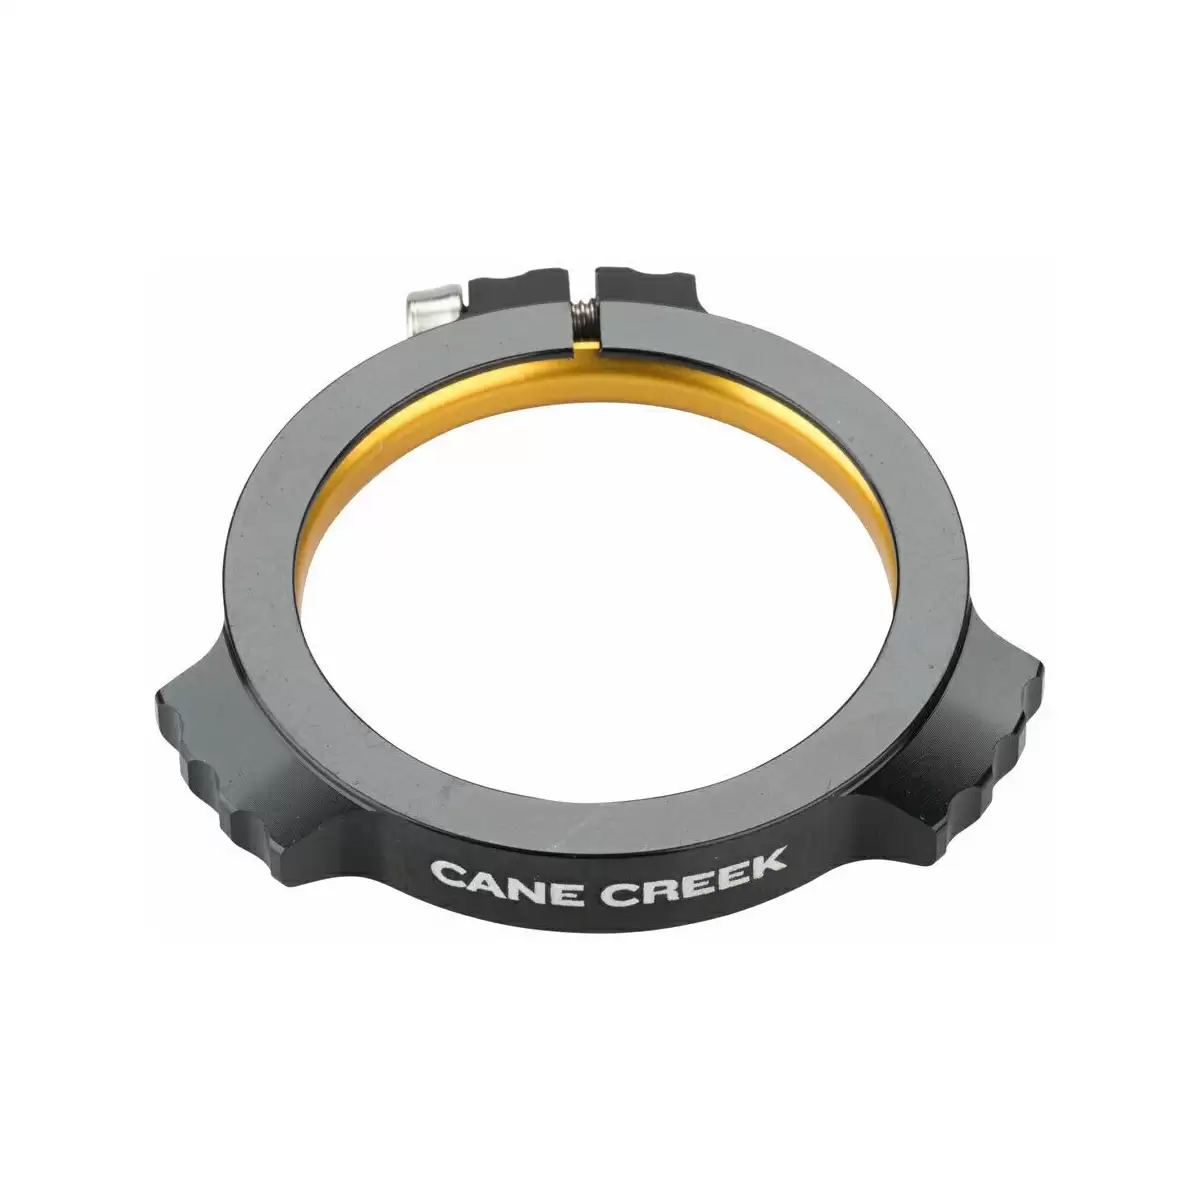 Preload ring for EEWings cranksets and 30mm Race Face and Sram pins - image